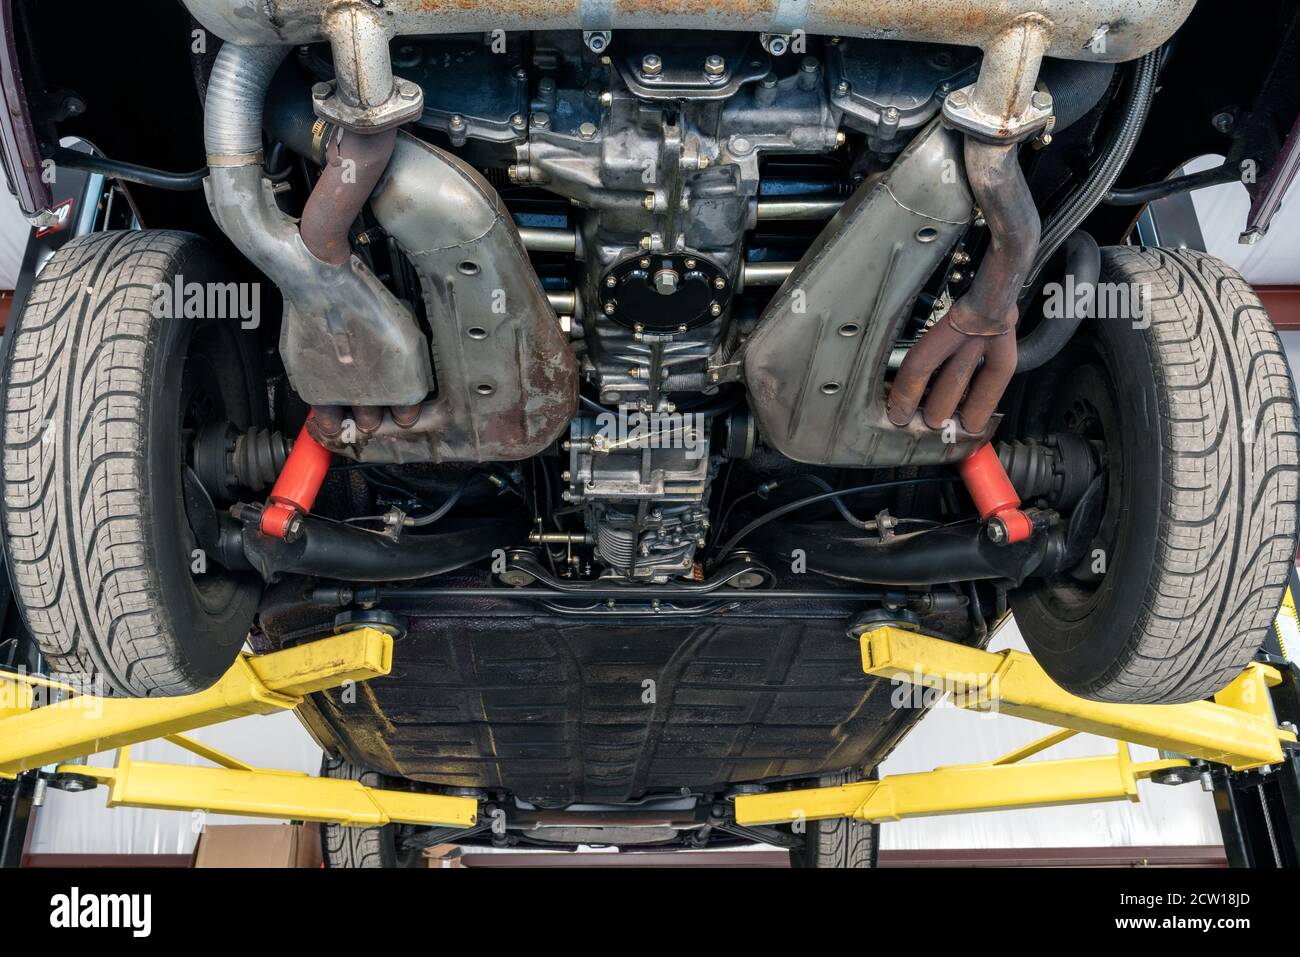 Undercarriage of fancy sports car show engineered design for speed and aerodynamics. Stock Photo